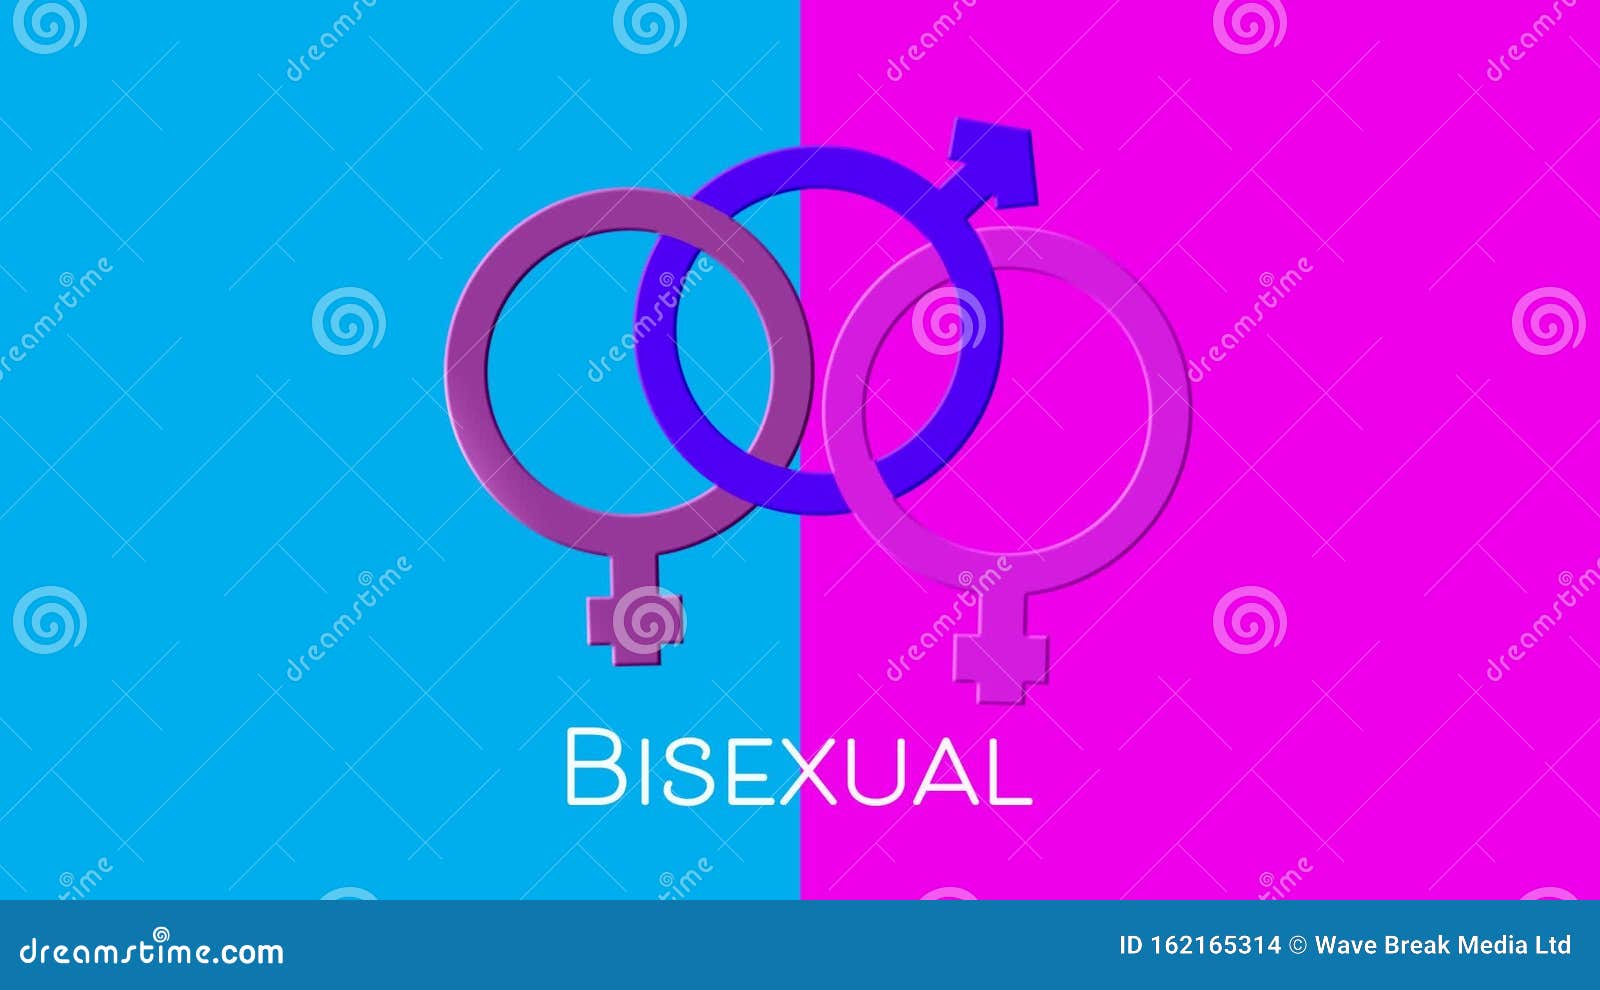 Bisexual Stock Footage and Videos